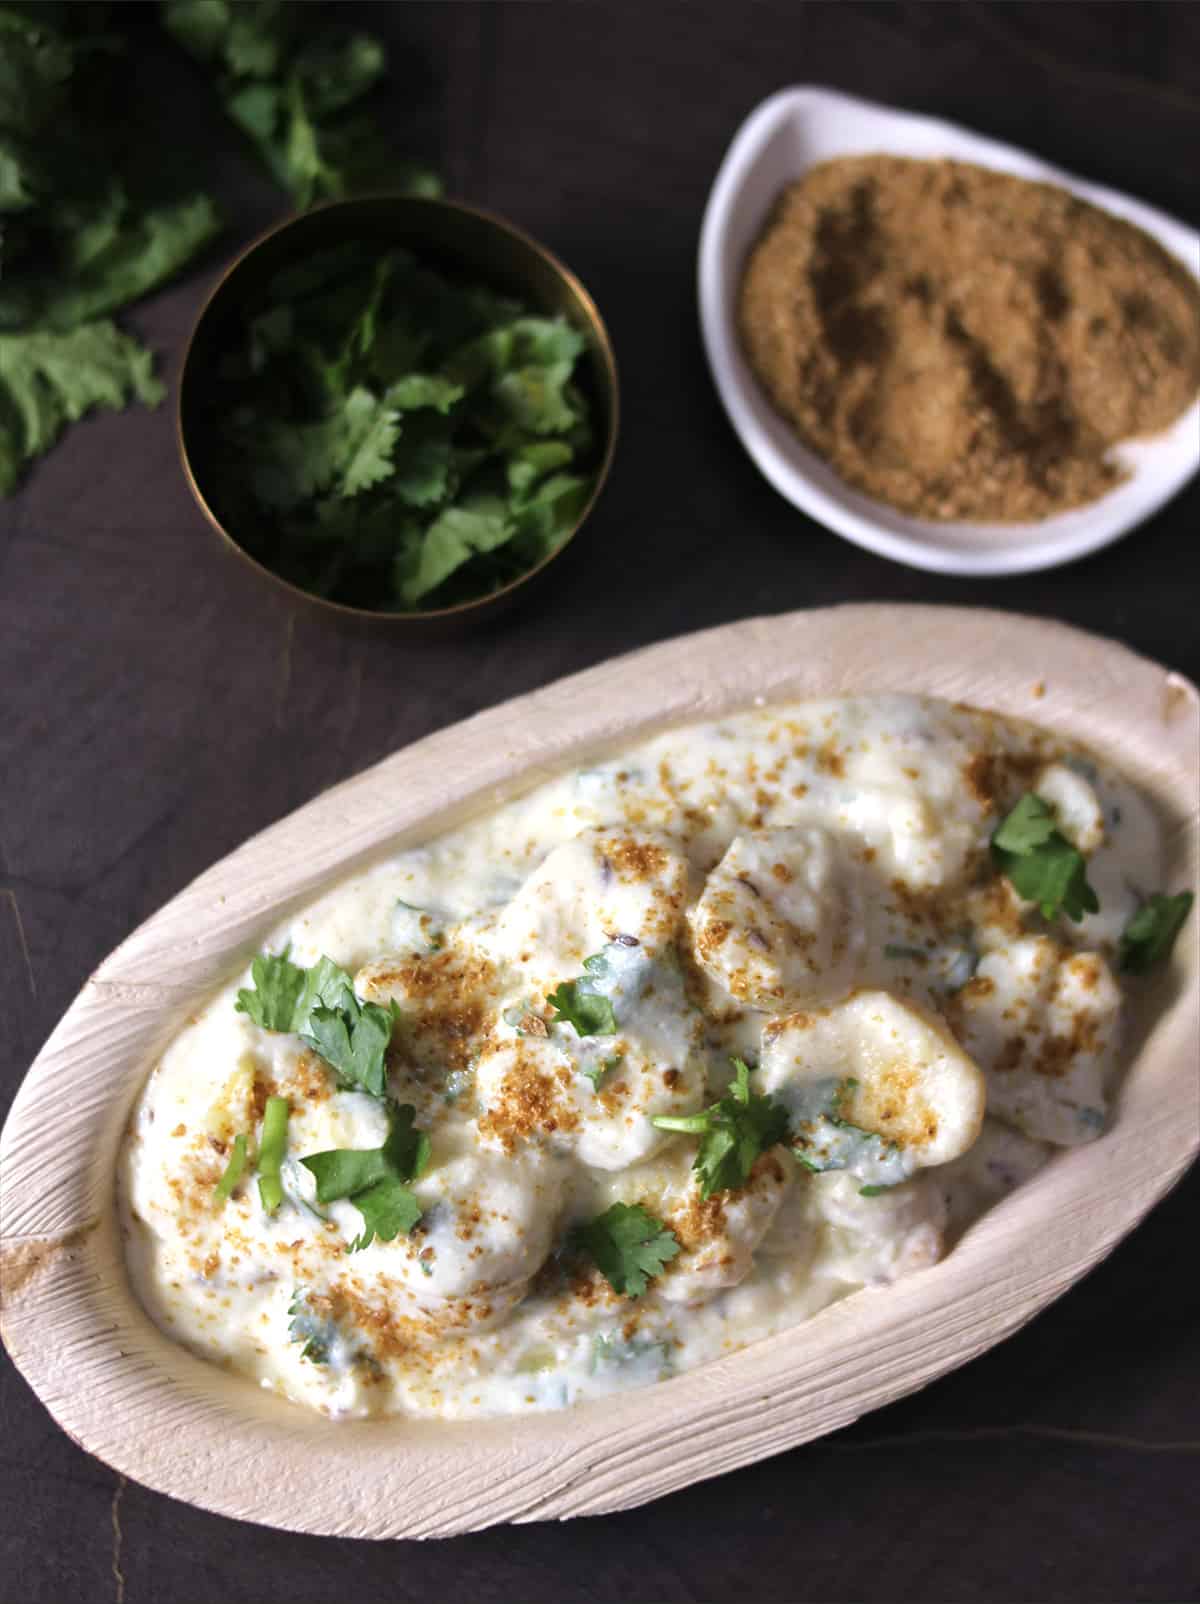 Top view of dahi aloo batate gojju or Indian recipes with curd